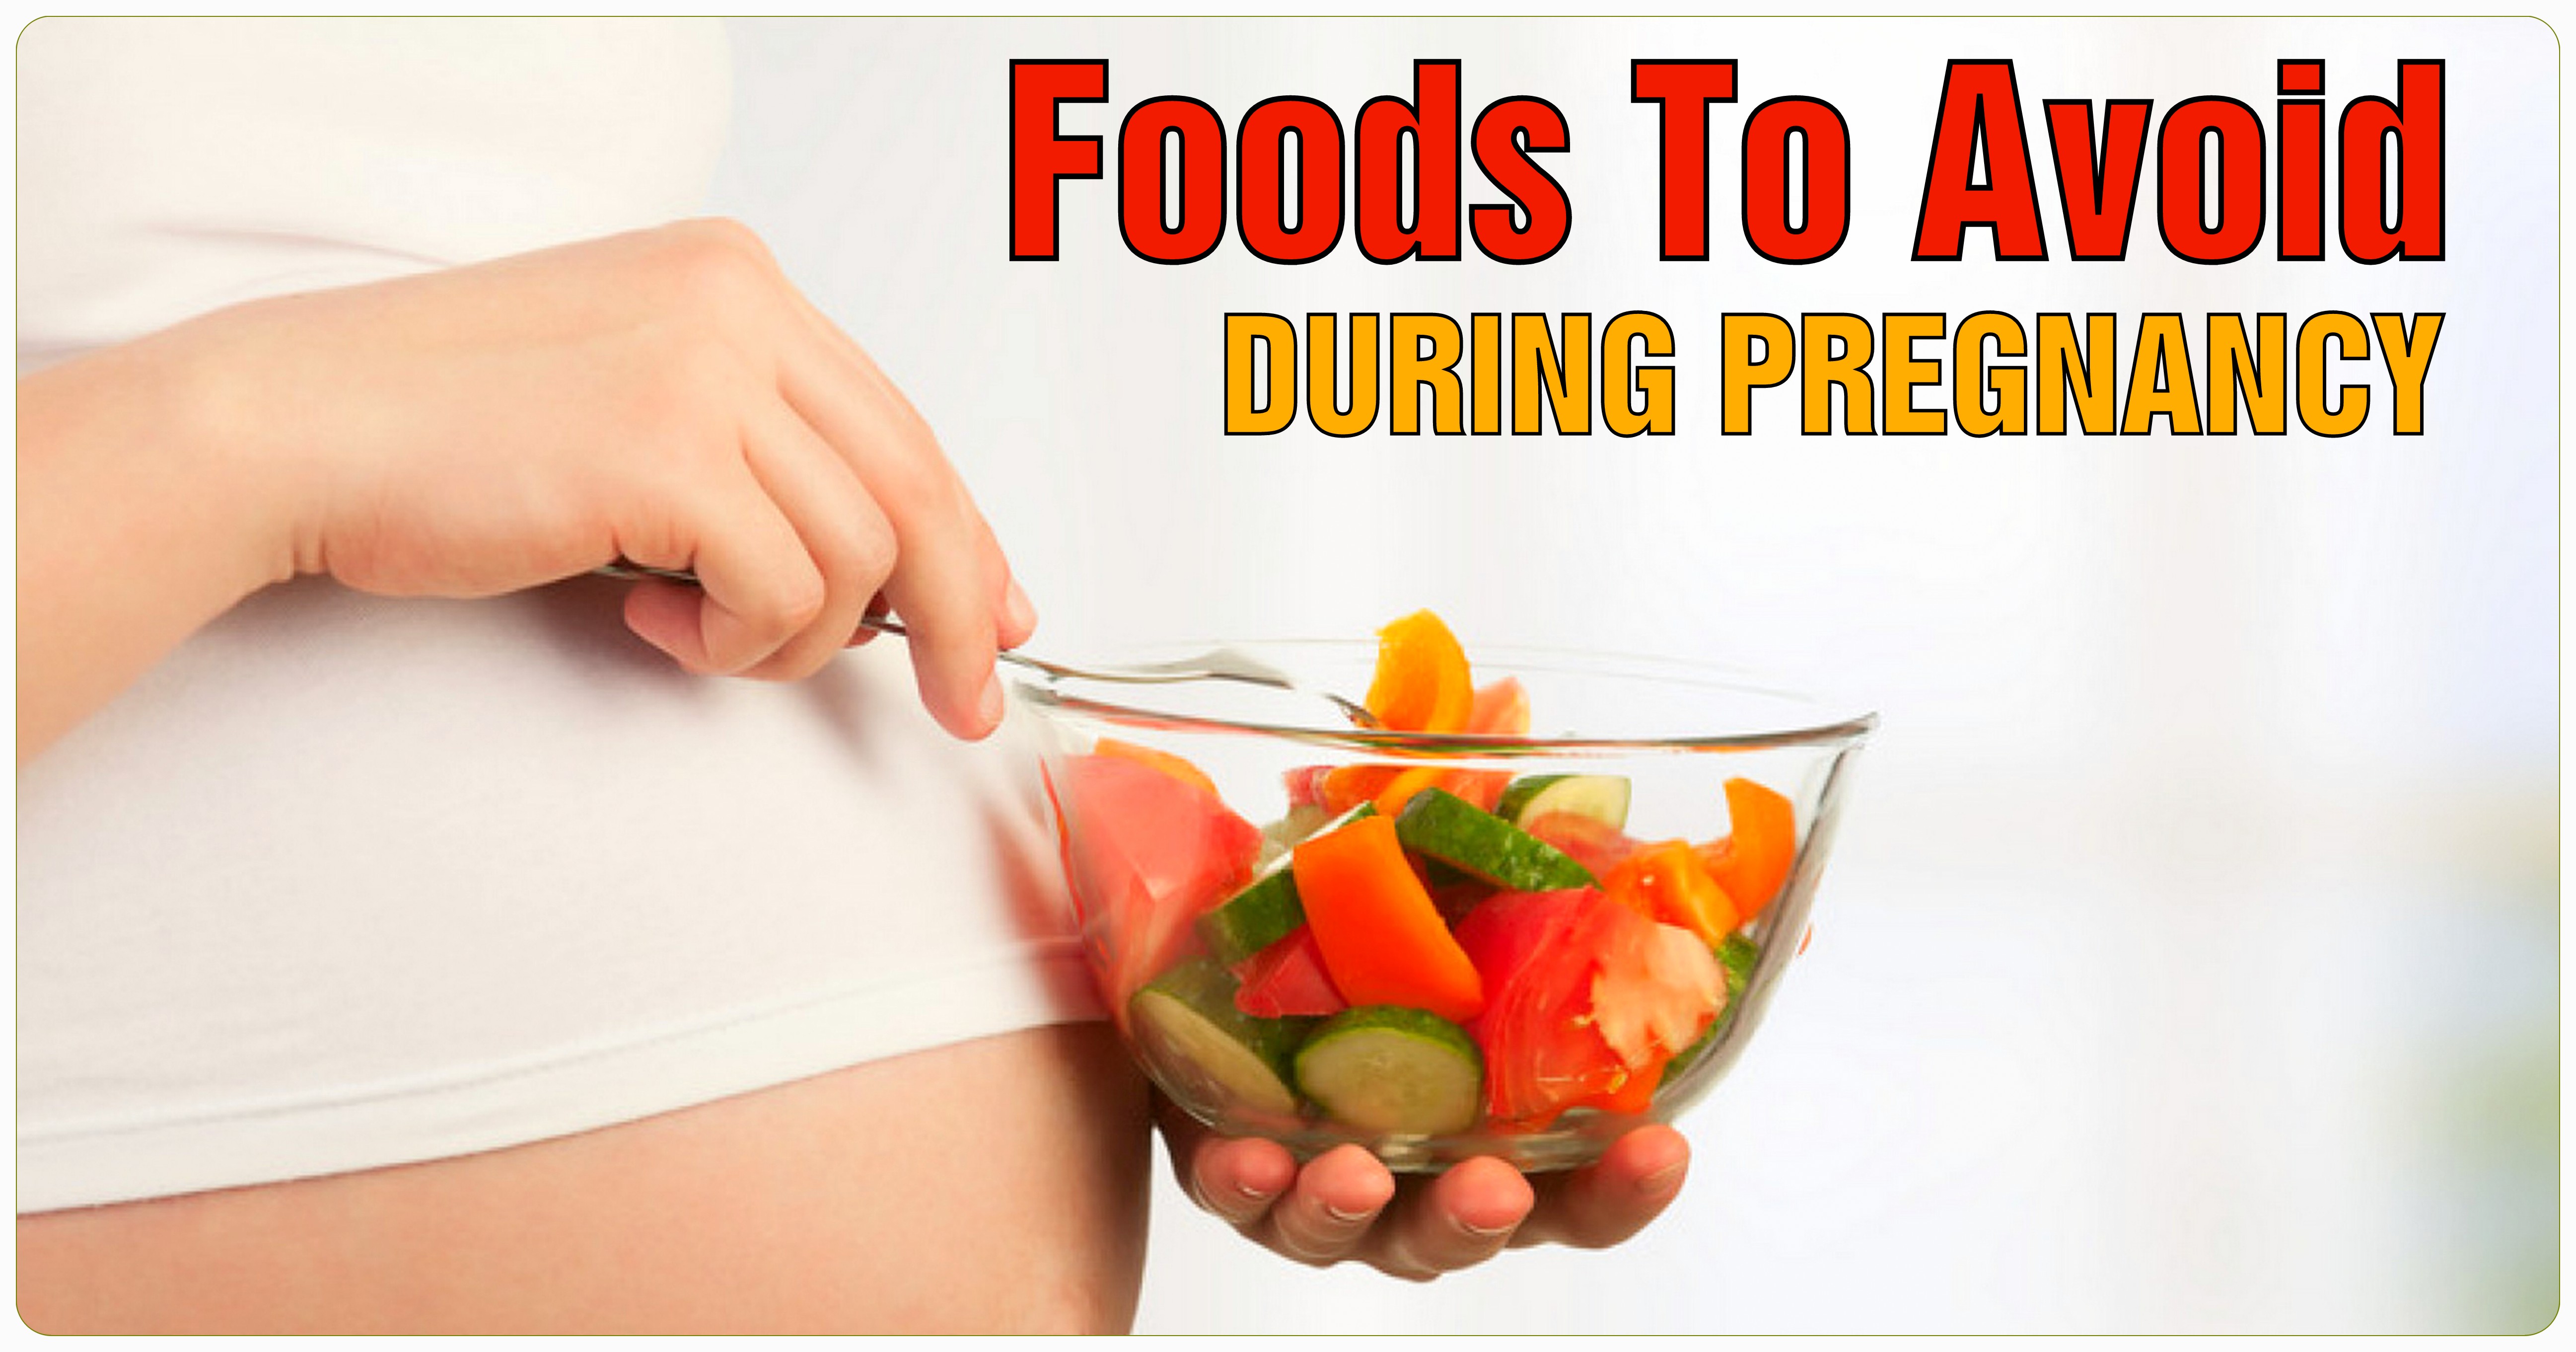 10-indian-foods-to-avoid-during-pregnancy-india-ivf-fertility-guide